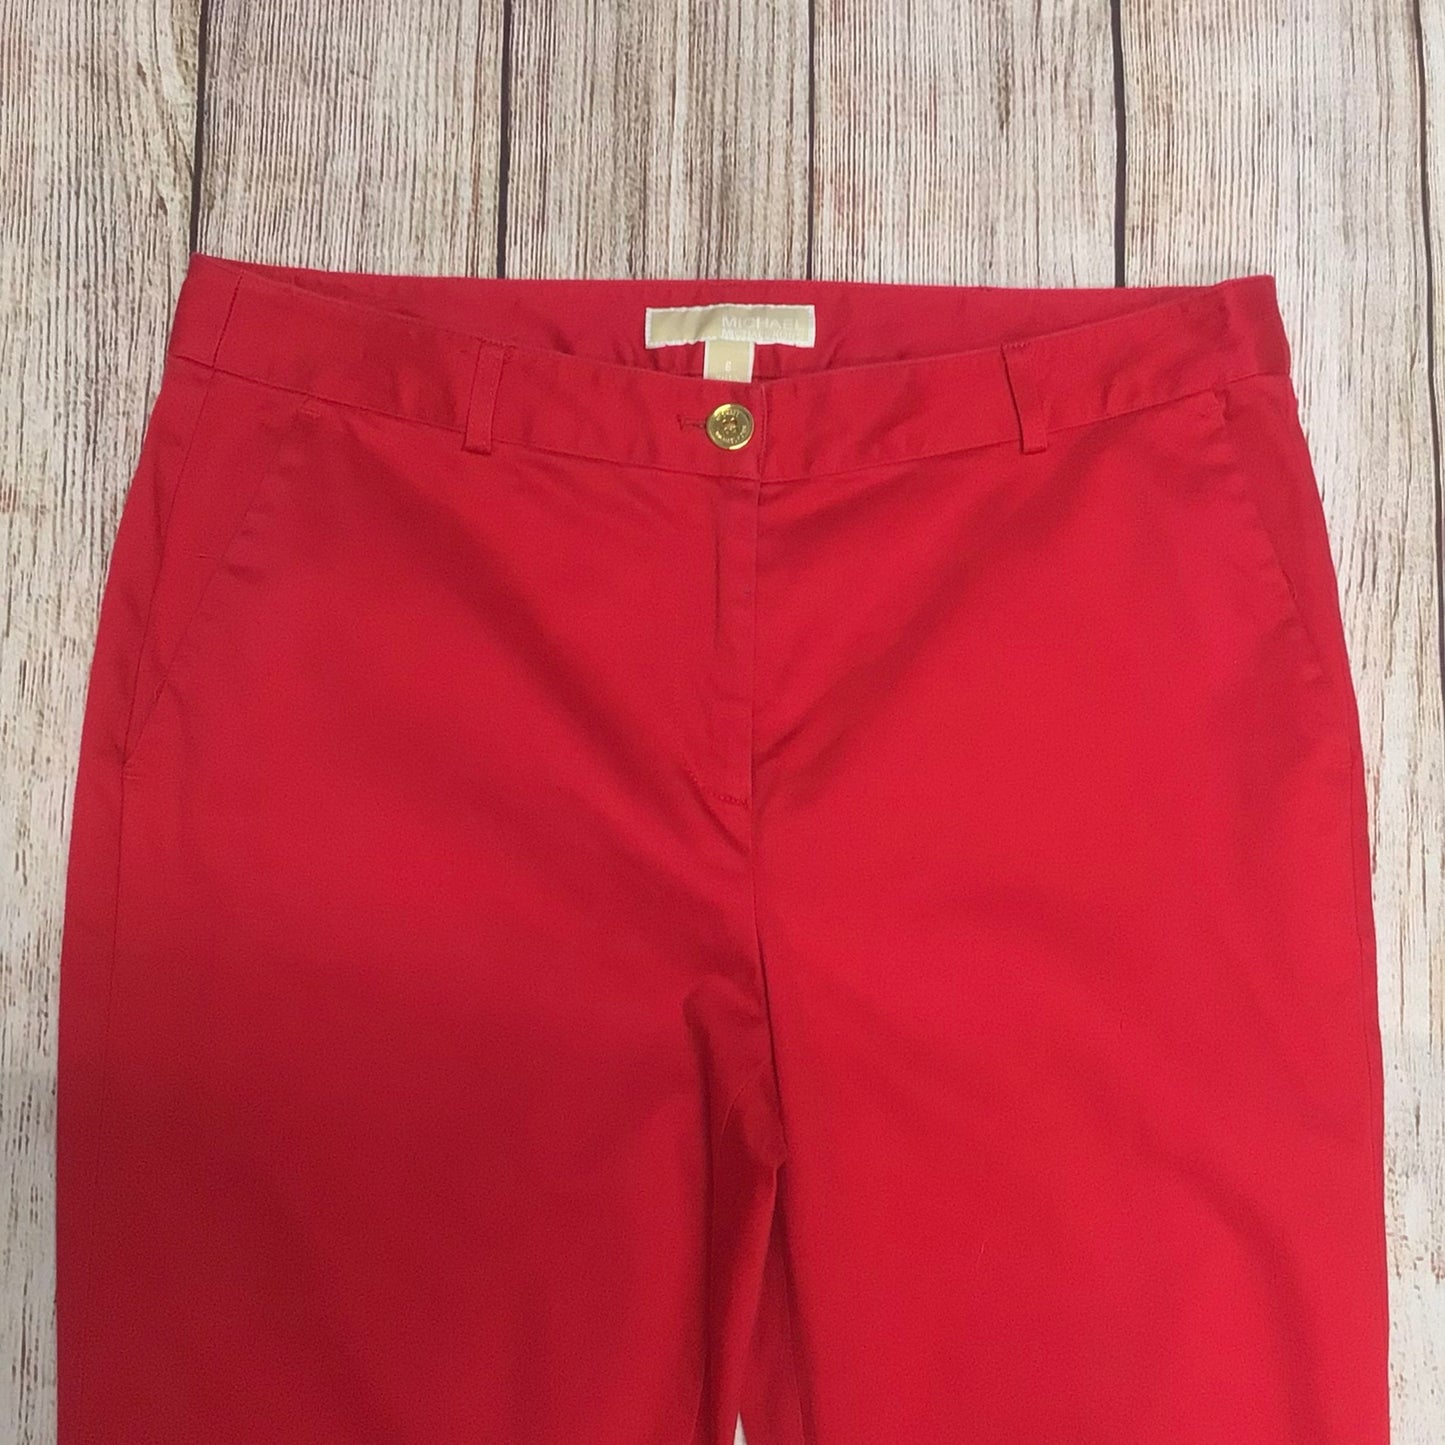 Michael Kors Pink Red Chino Trousers Size 6